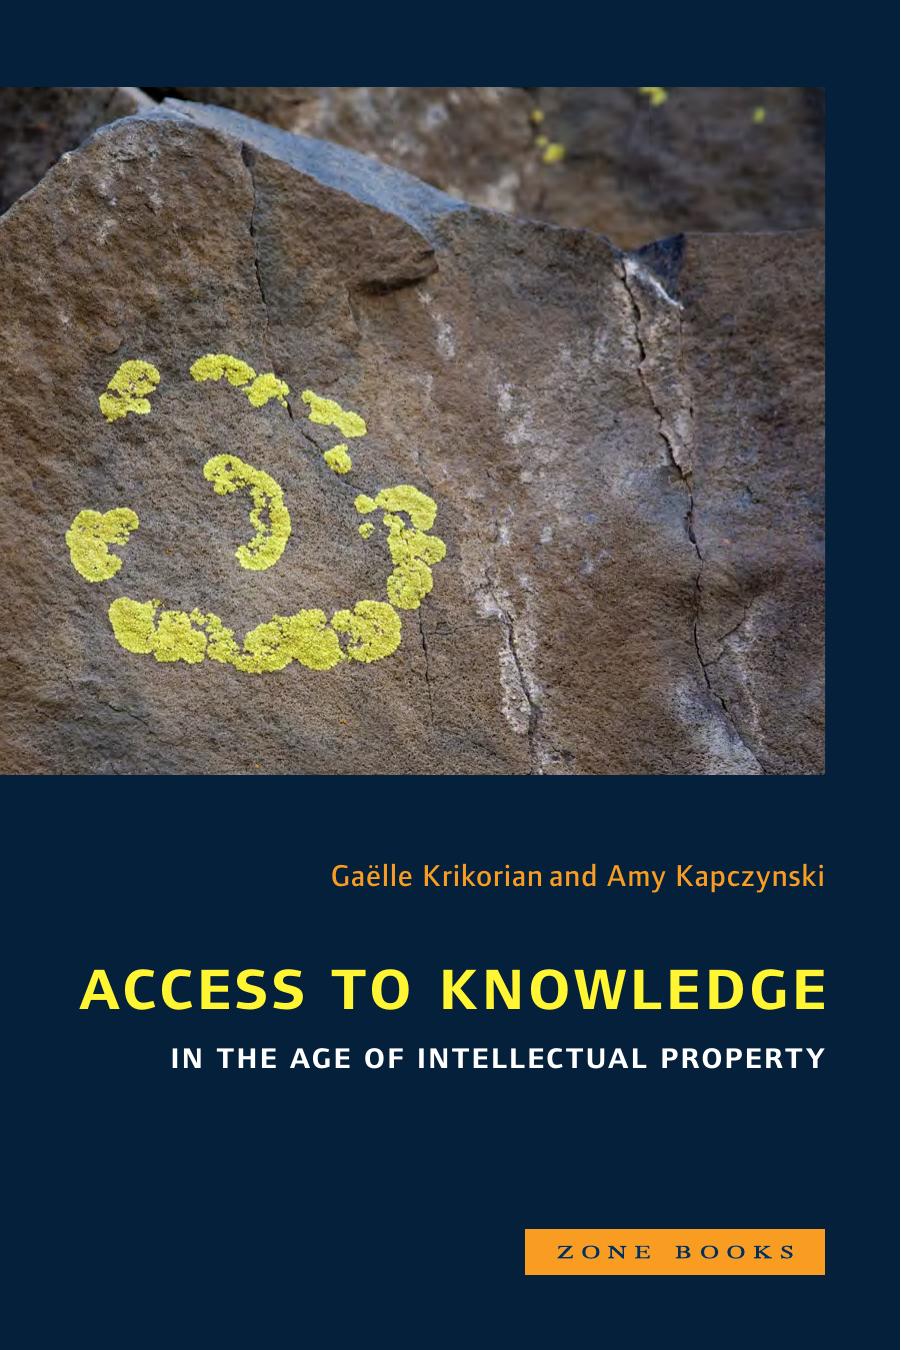 Access to Knowledge in the Age of Inellectual Property 2010